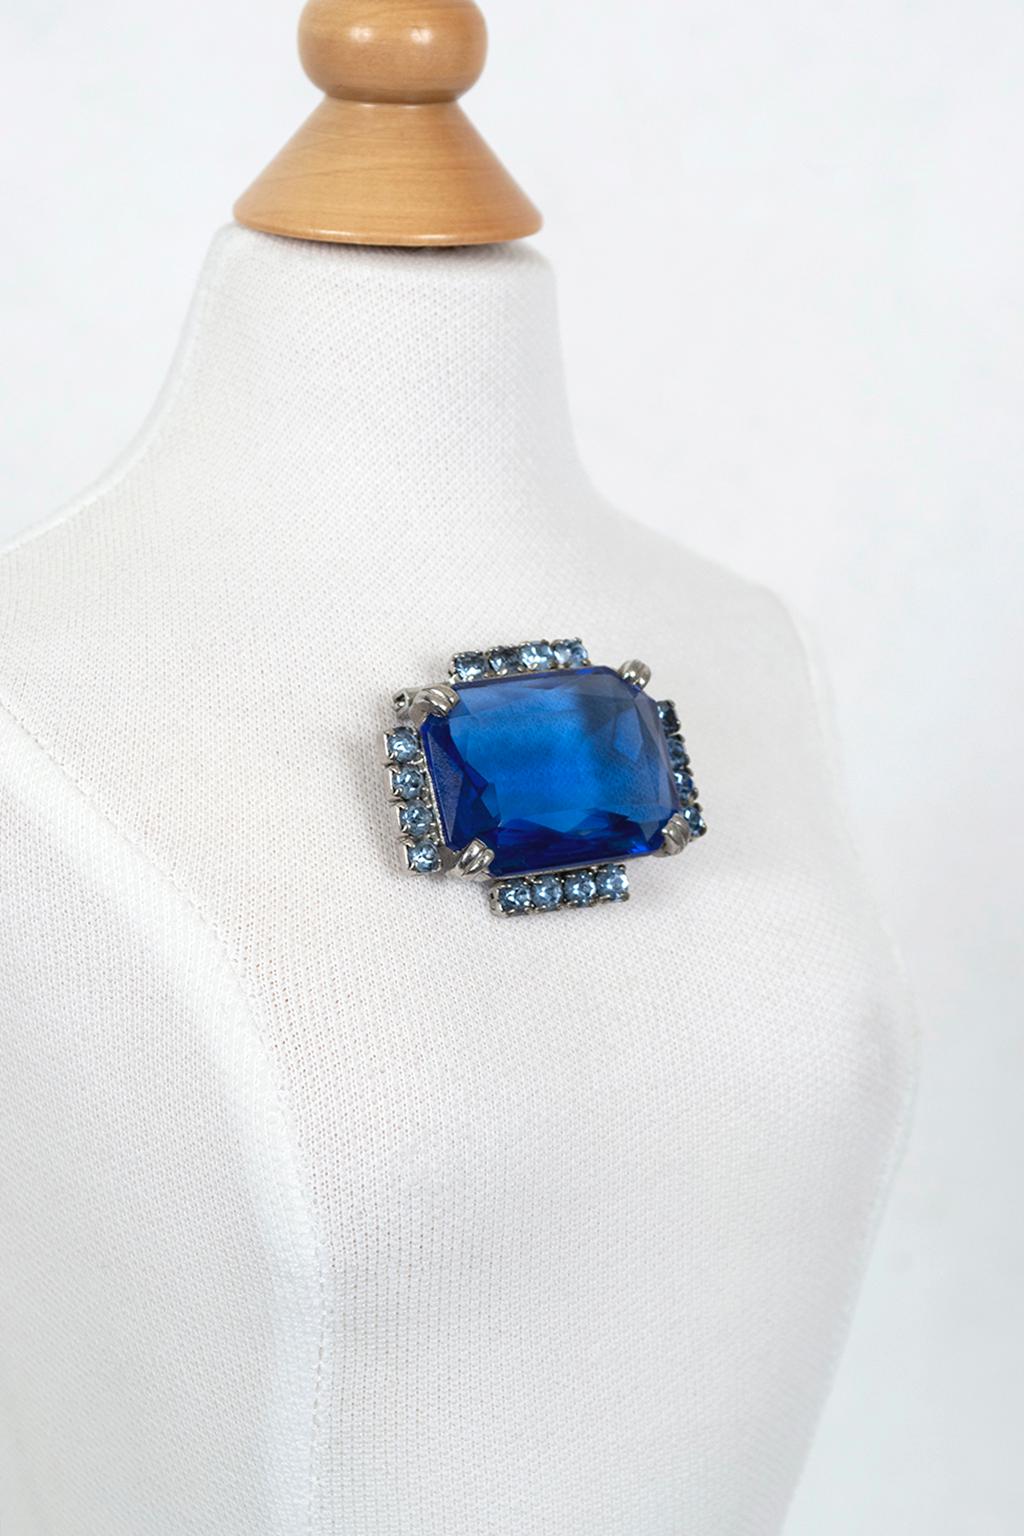 Cartier Style Emerald Cut Sapphire Crystal Brooch, Ear Crawler Demi Parure–1950s In Good Condition In Tucson, AZ